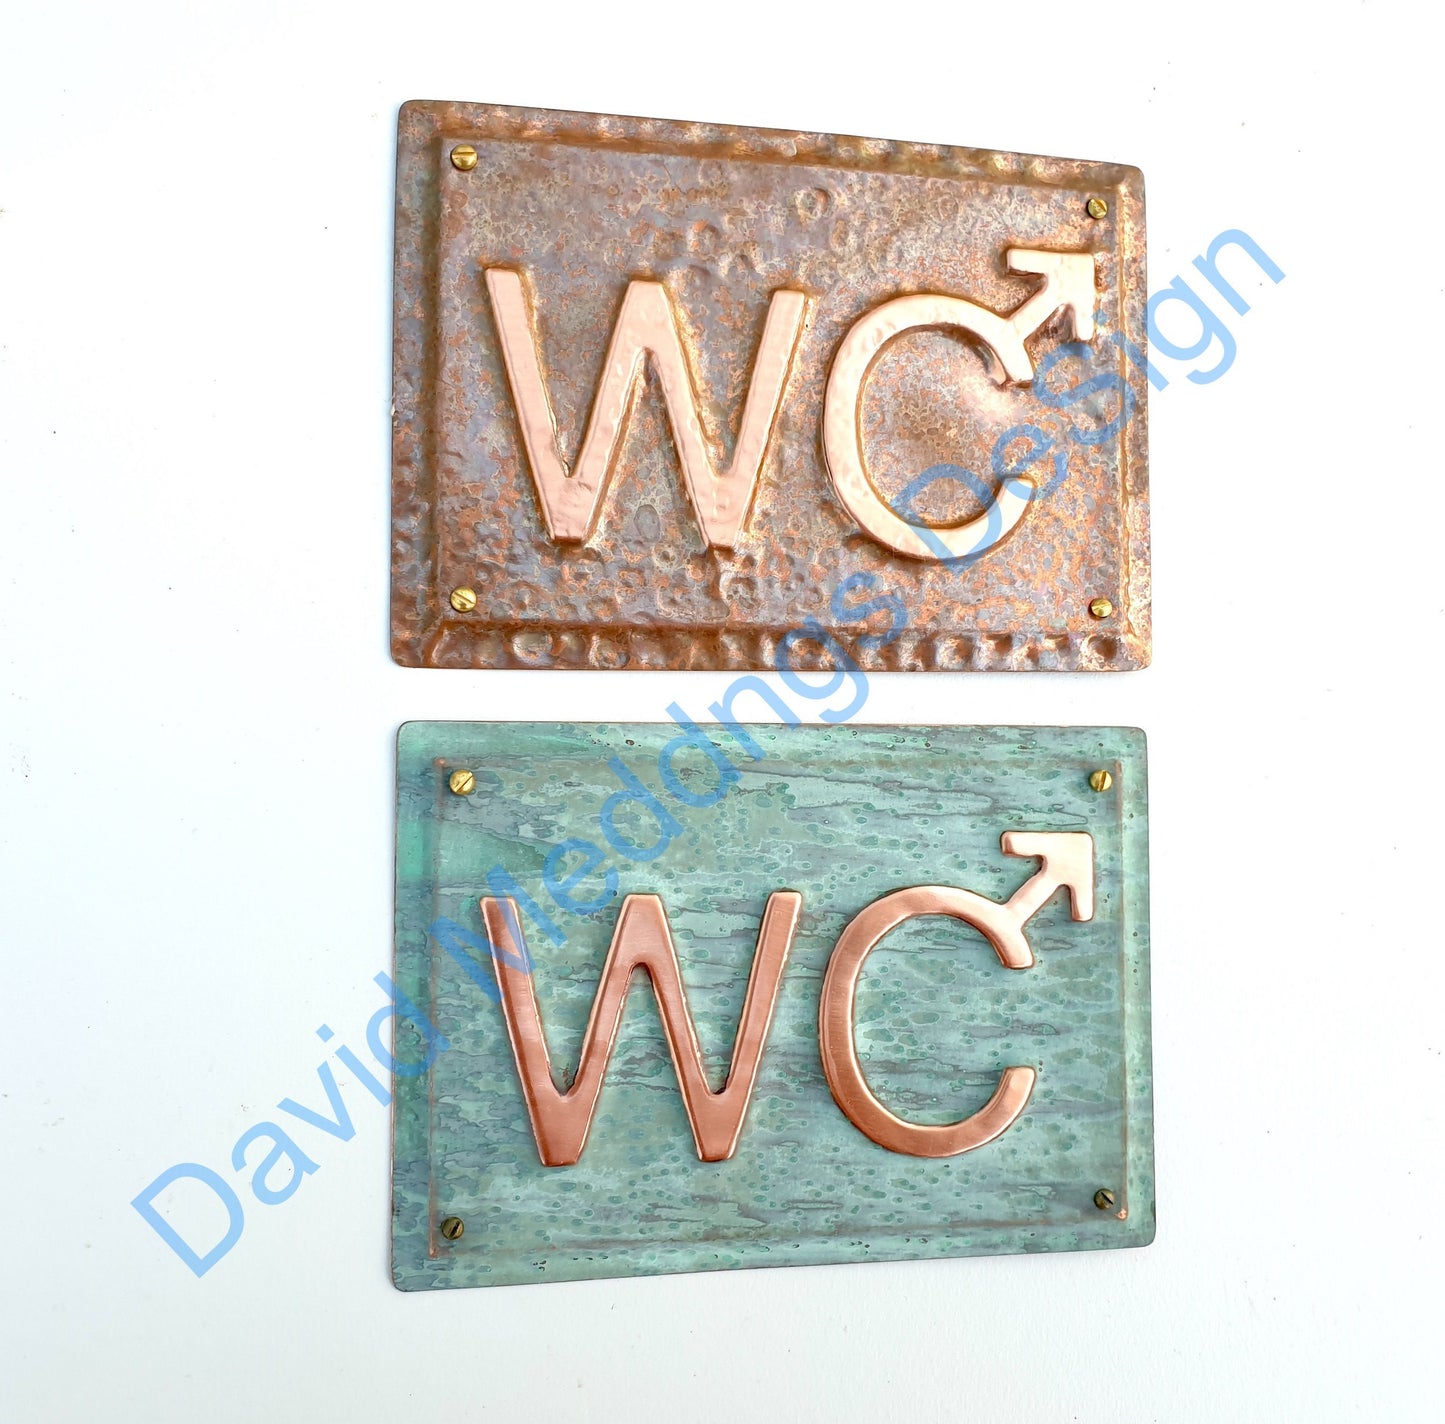 WC Male symbol Copper door plaque toilet lavatory sign in 2"/50mm high letters tx